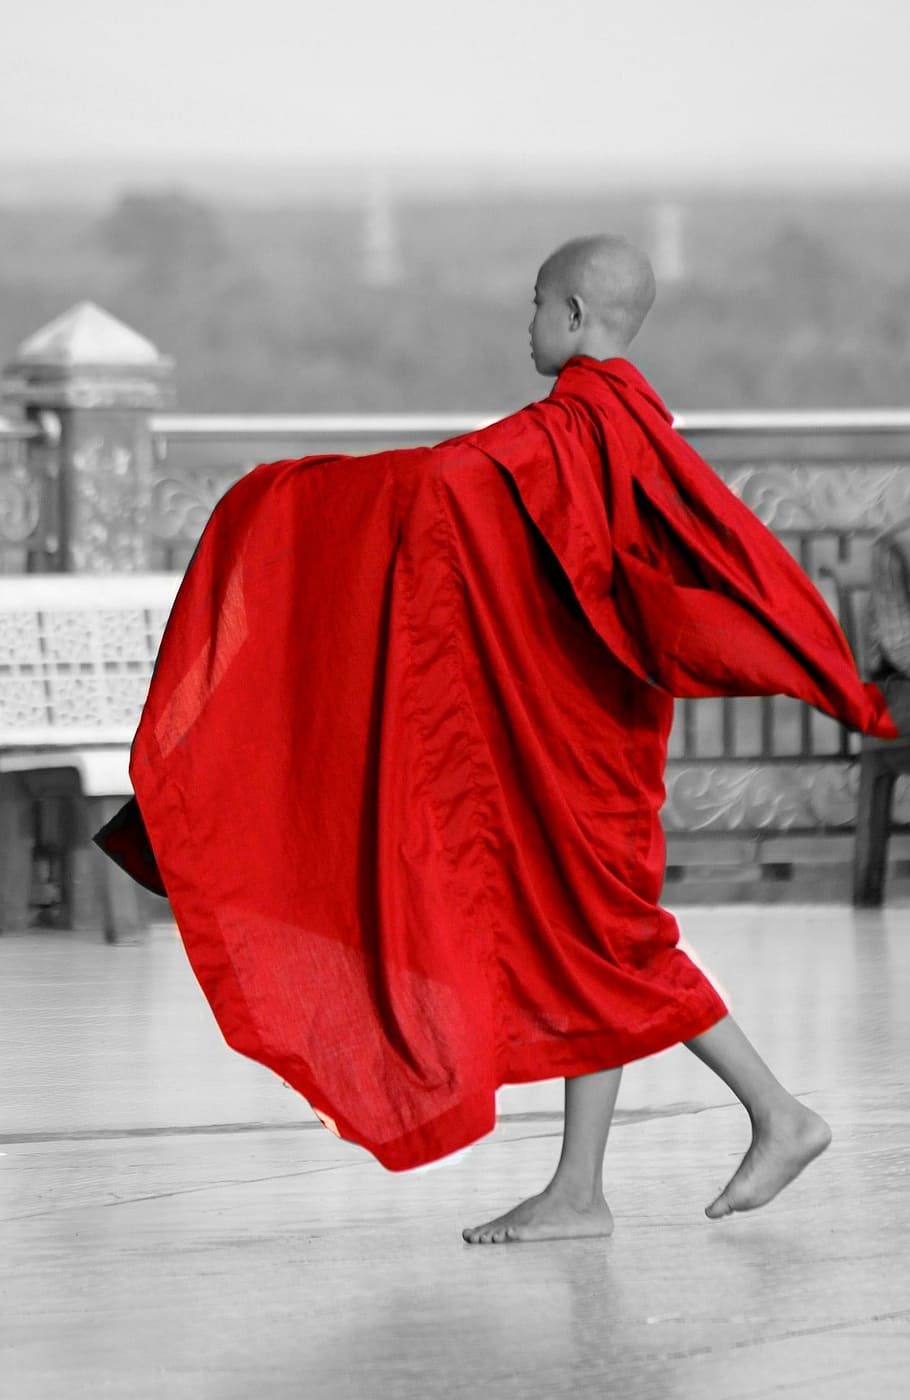 monk, burma, myanmar, buddhist, human, red, full length, focus on foreground, religion, belief